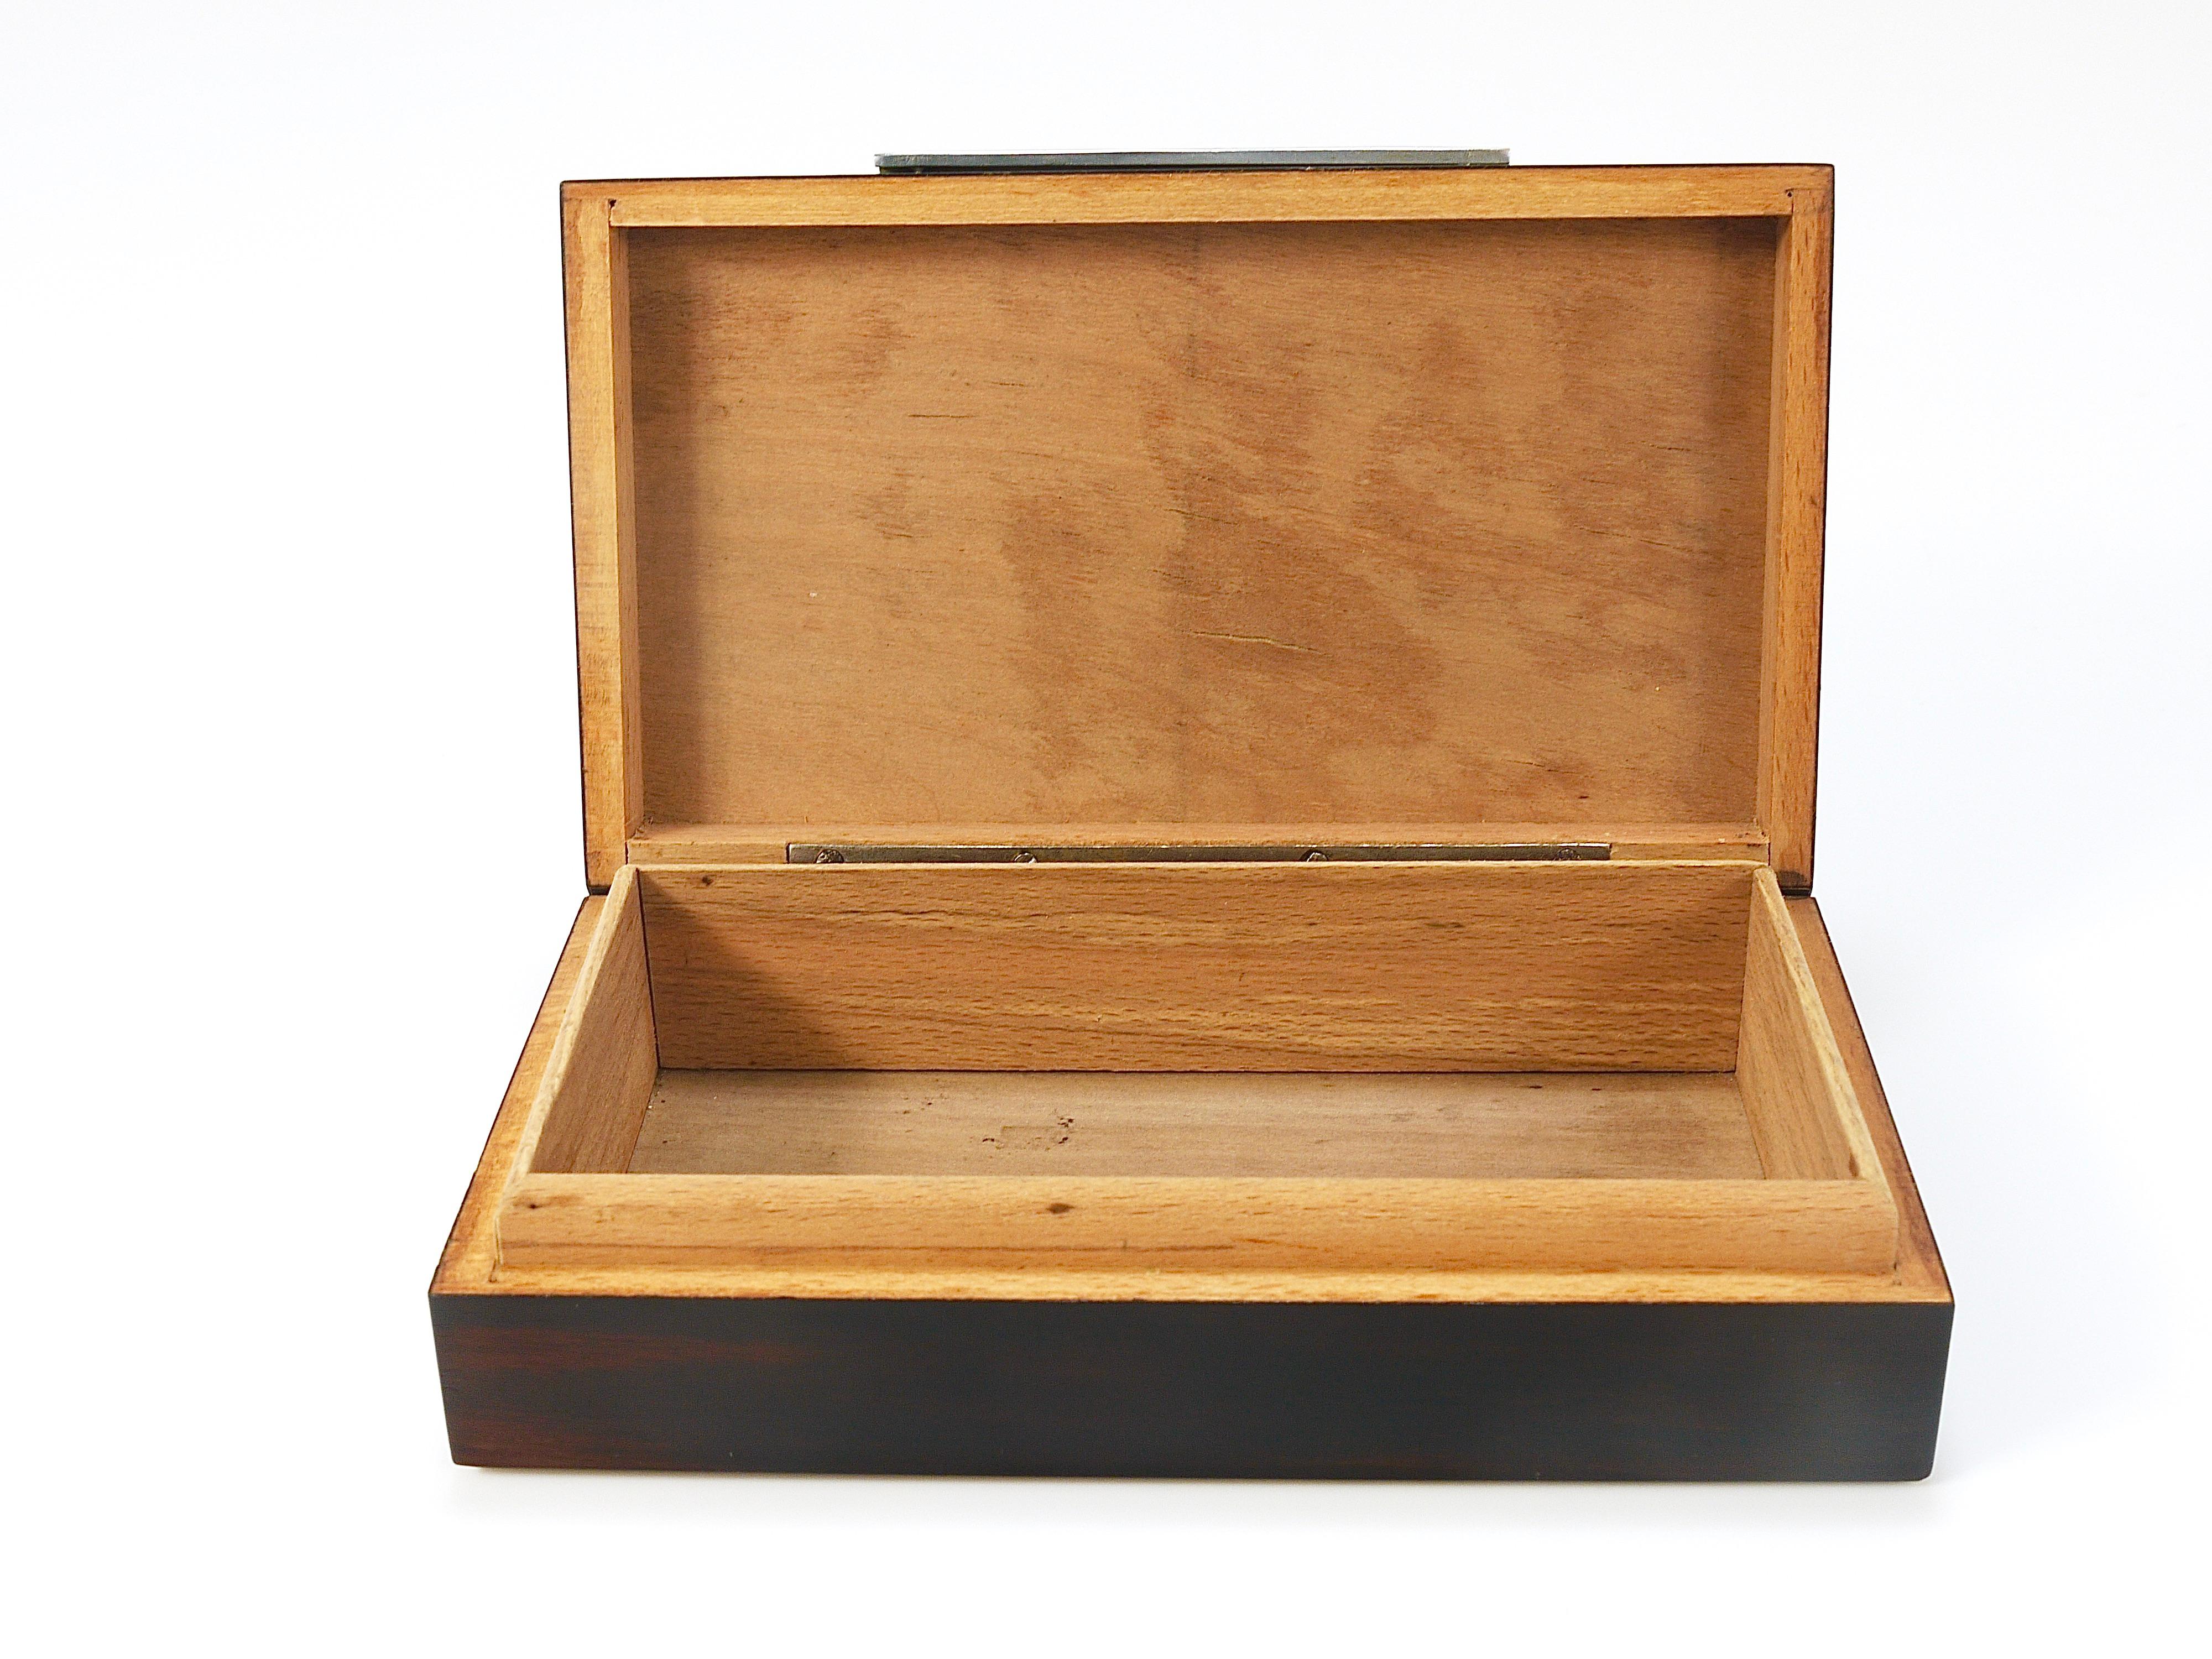 French Art Deco Rosewood & Nickel Storage Box, Maison Desny Style, France, 1930s For Sale 1